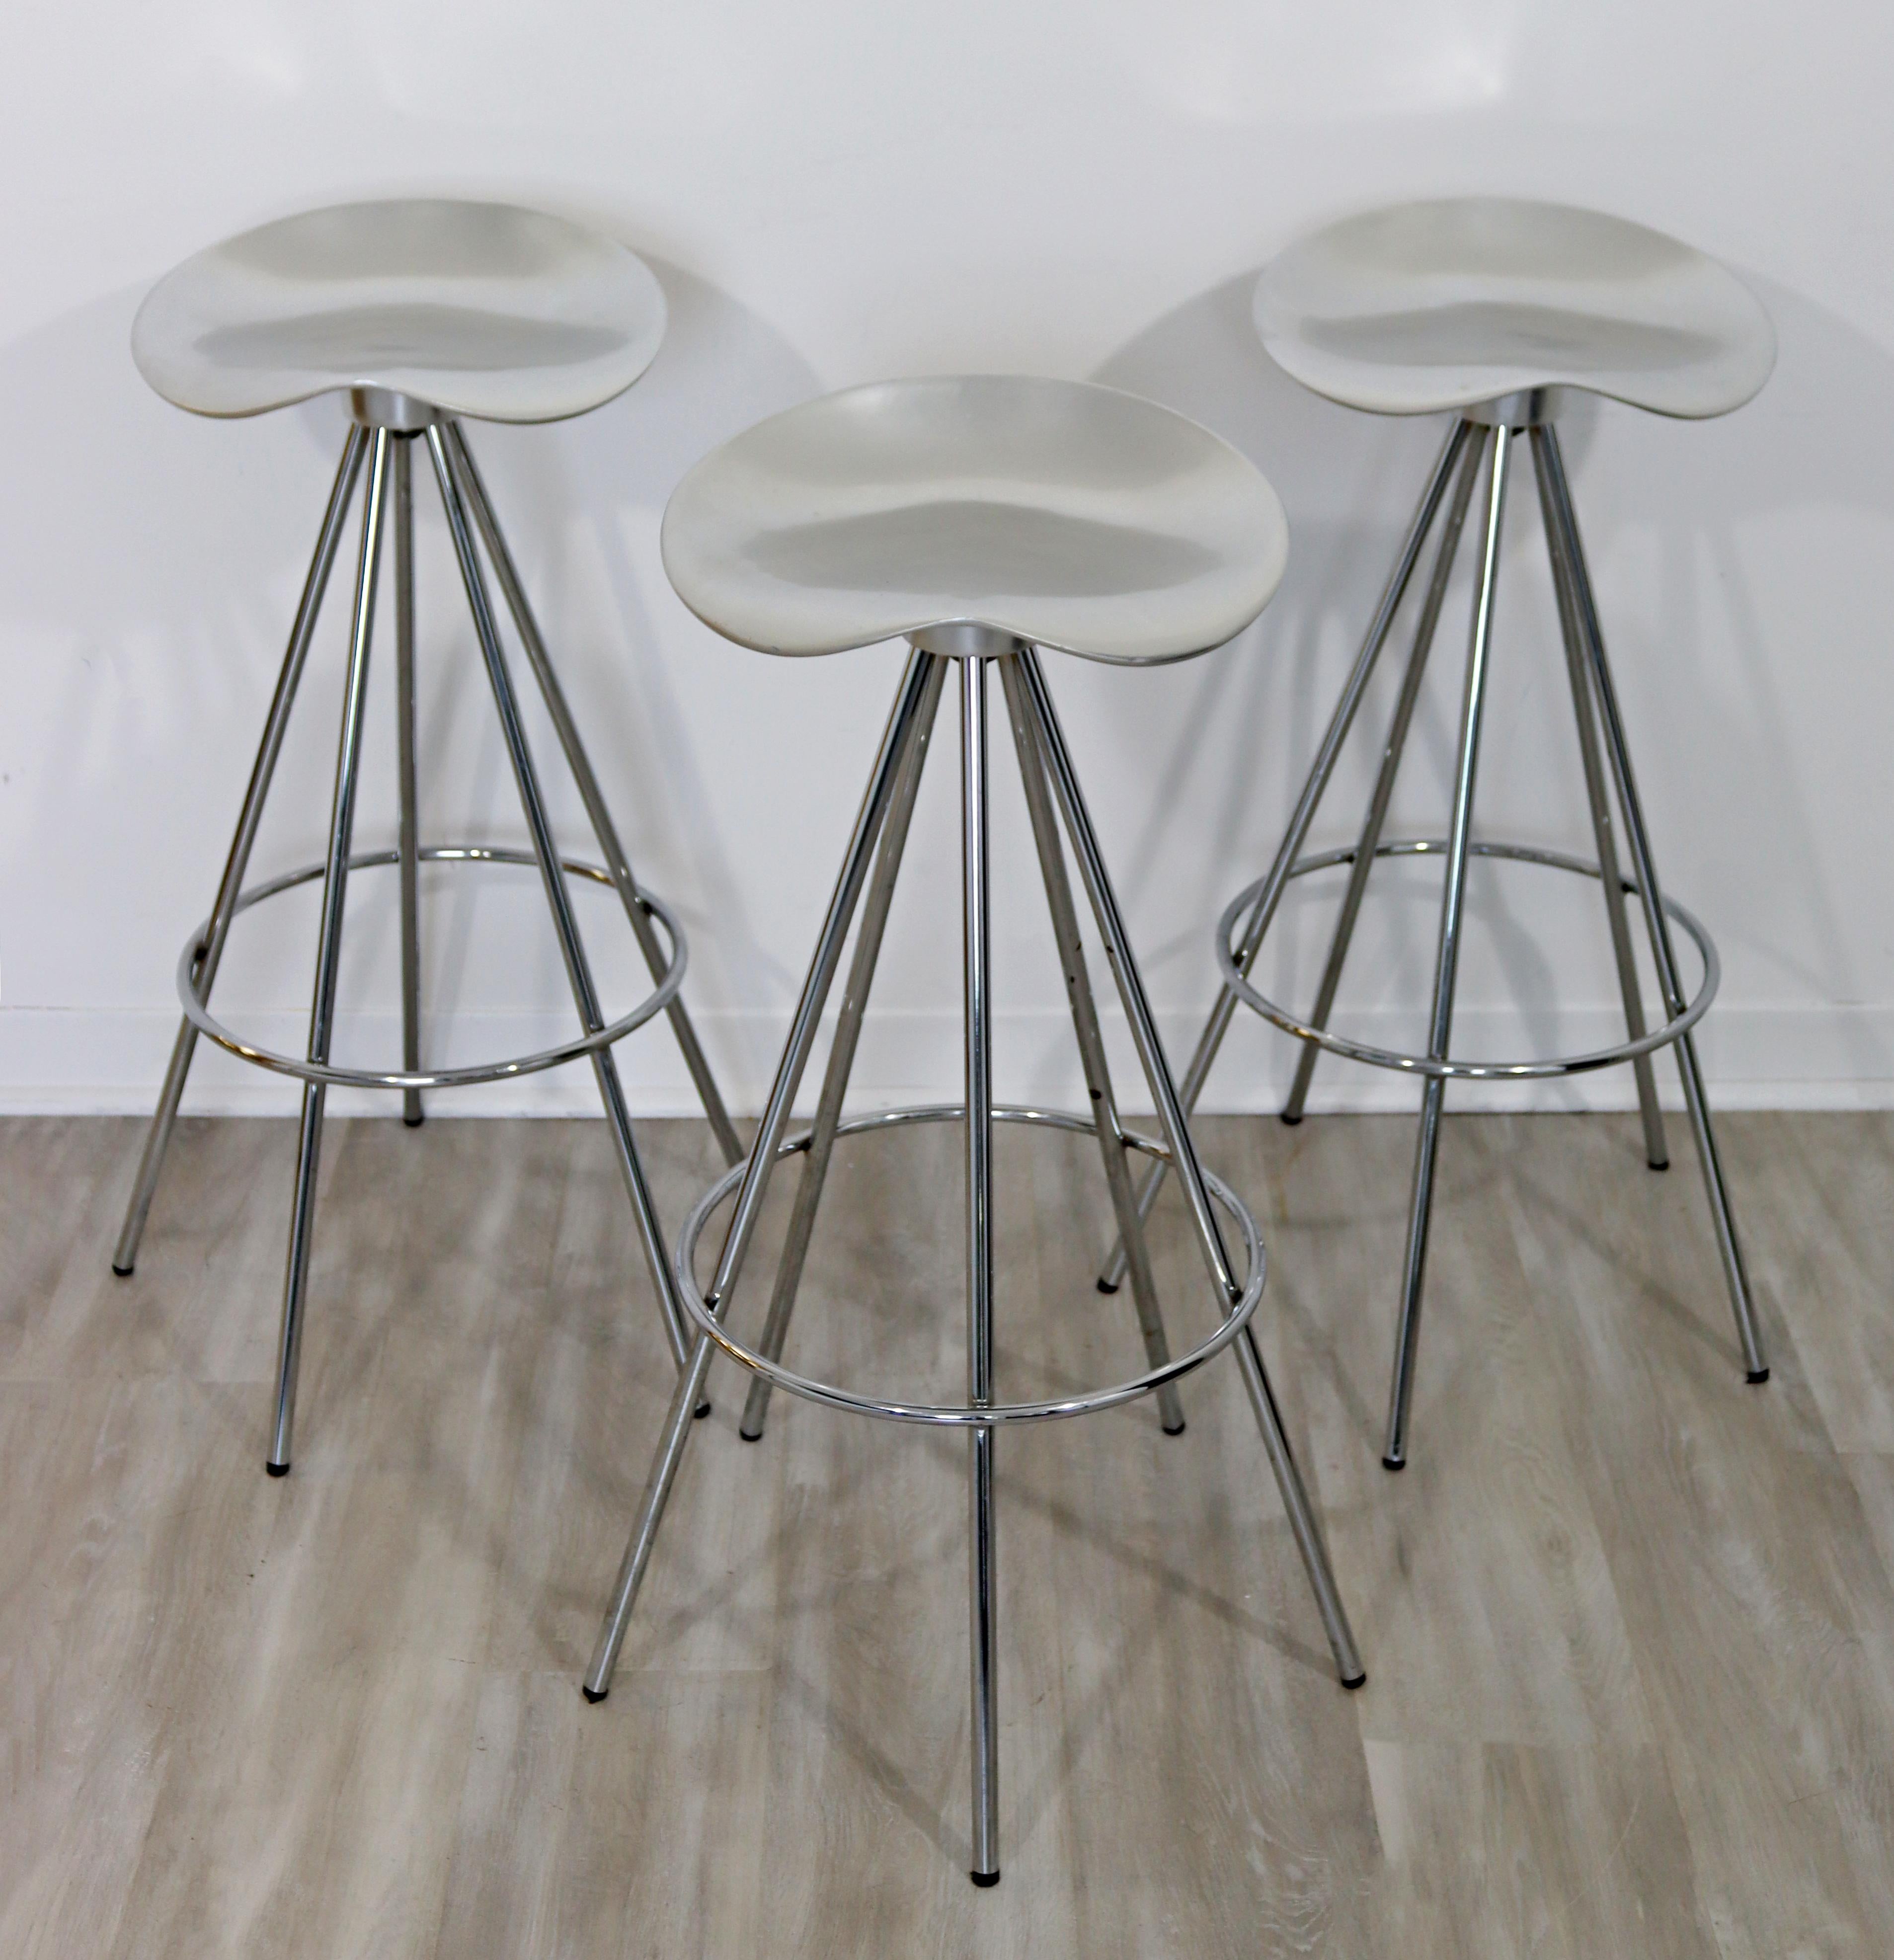 For your consideration is a superb set of three, silver Jamaica bar stools, with molded seats, by Pepe Cortes for Amat, made in Spain. In excellent vintage condition. The dimensions are 14